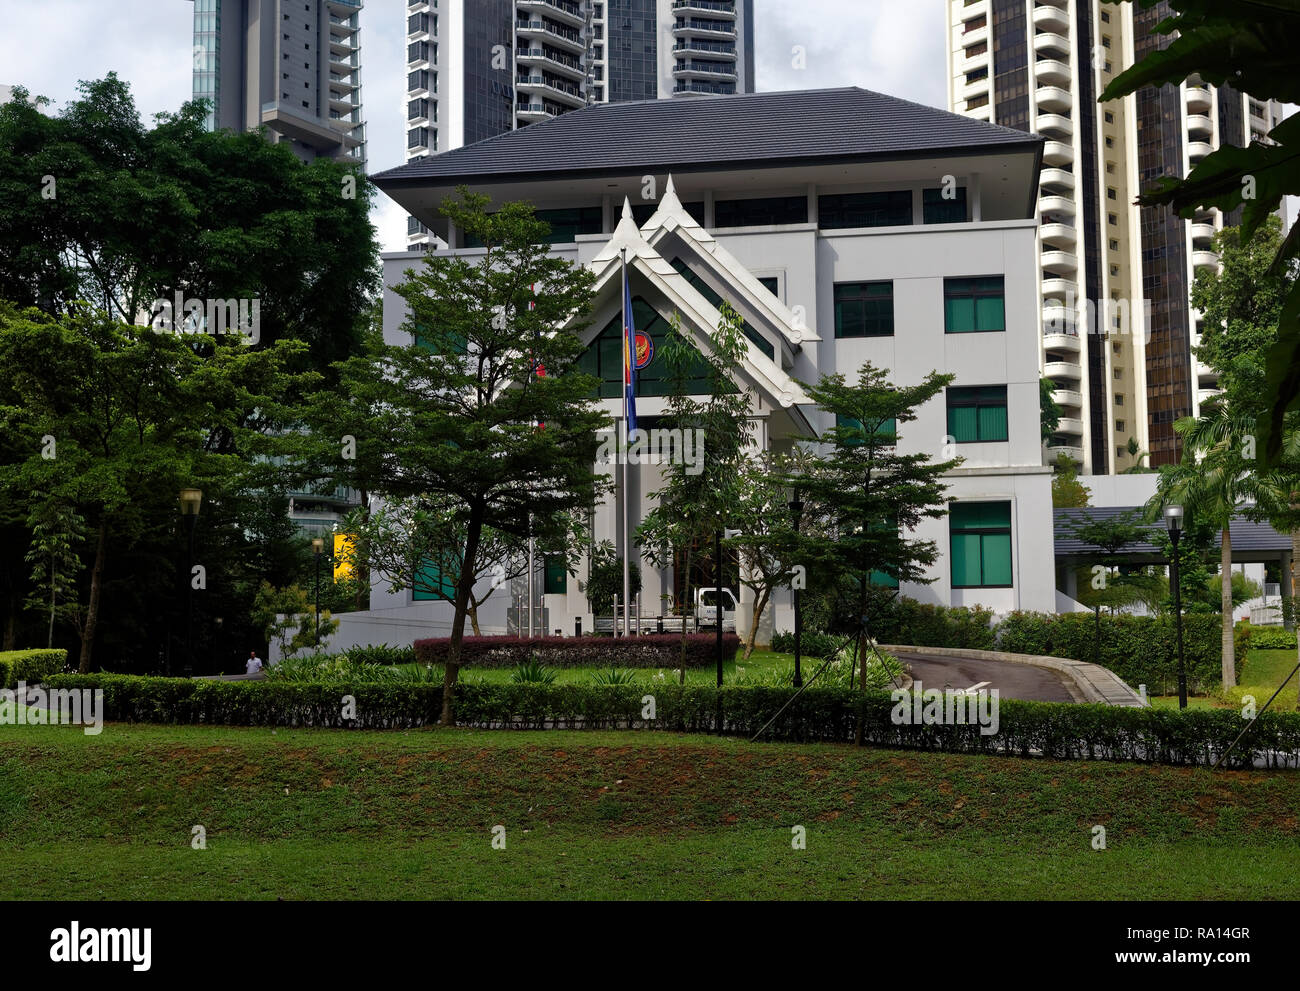 The traditional architecture of the Thai embassy in Orchard Road, Singapore, overlooked by modern tower blocks of apartments and hotels Stock Photo